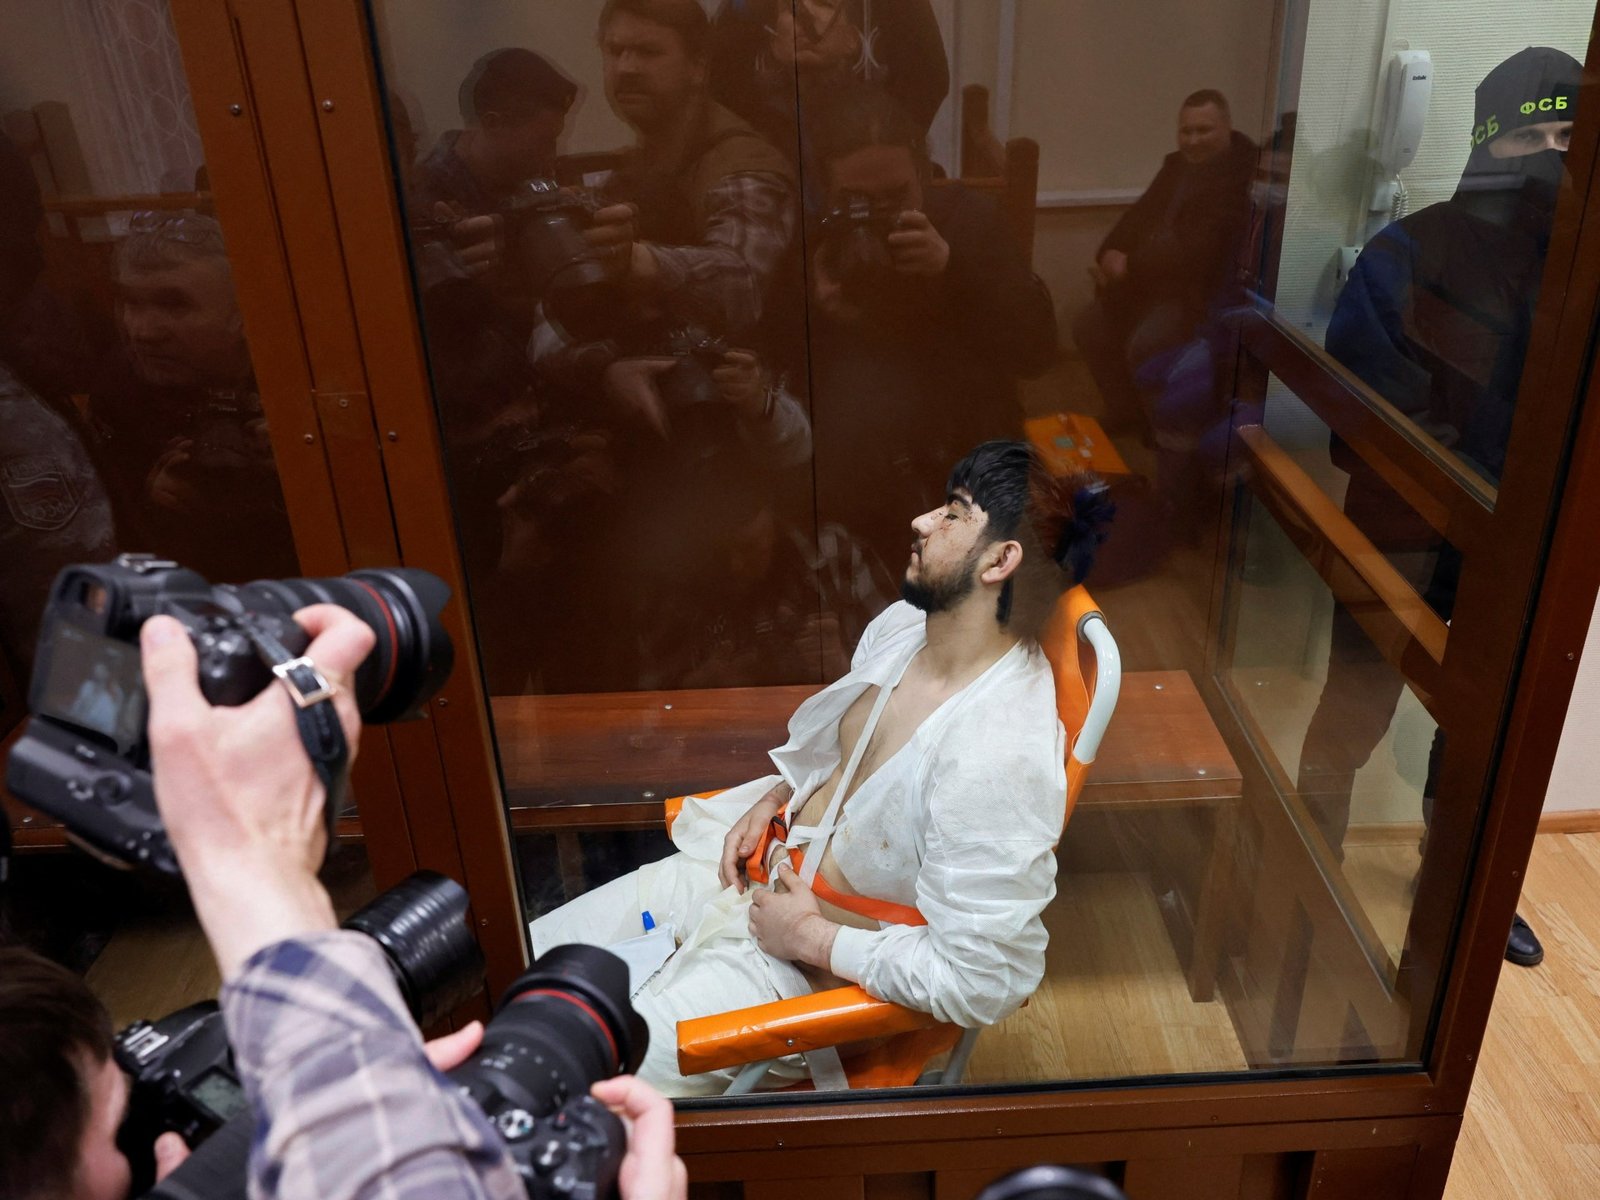 Moscow theatre attack suspects show signs of beating in court | ISILISIS